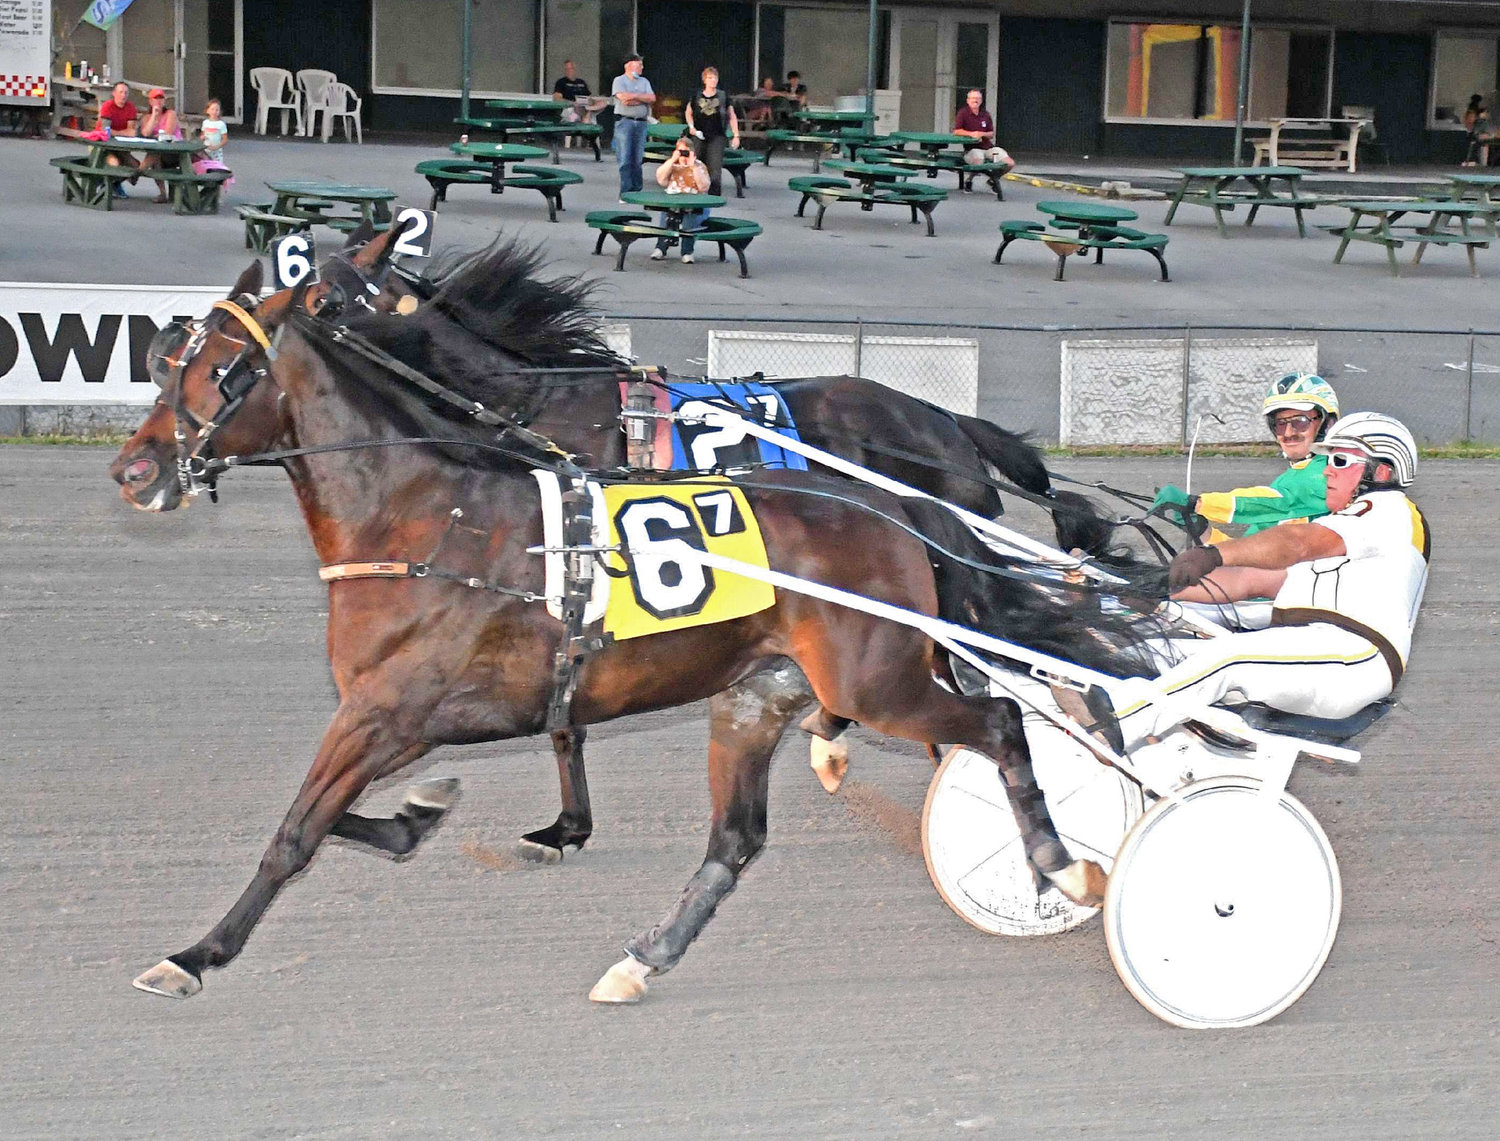 Bourbon Express and driver Howard Okusko Jr. won the $8,800 Open Trot at Vernon Downs Saturday with a late charge. The win was in a season-best 1:54. It was the horse’s second win of the season at 16th career victory.